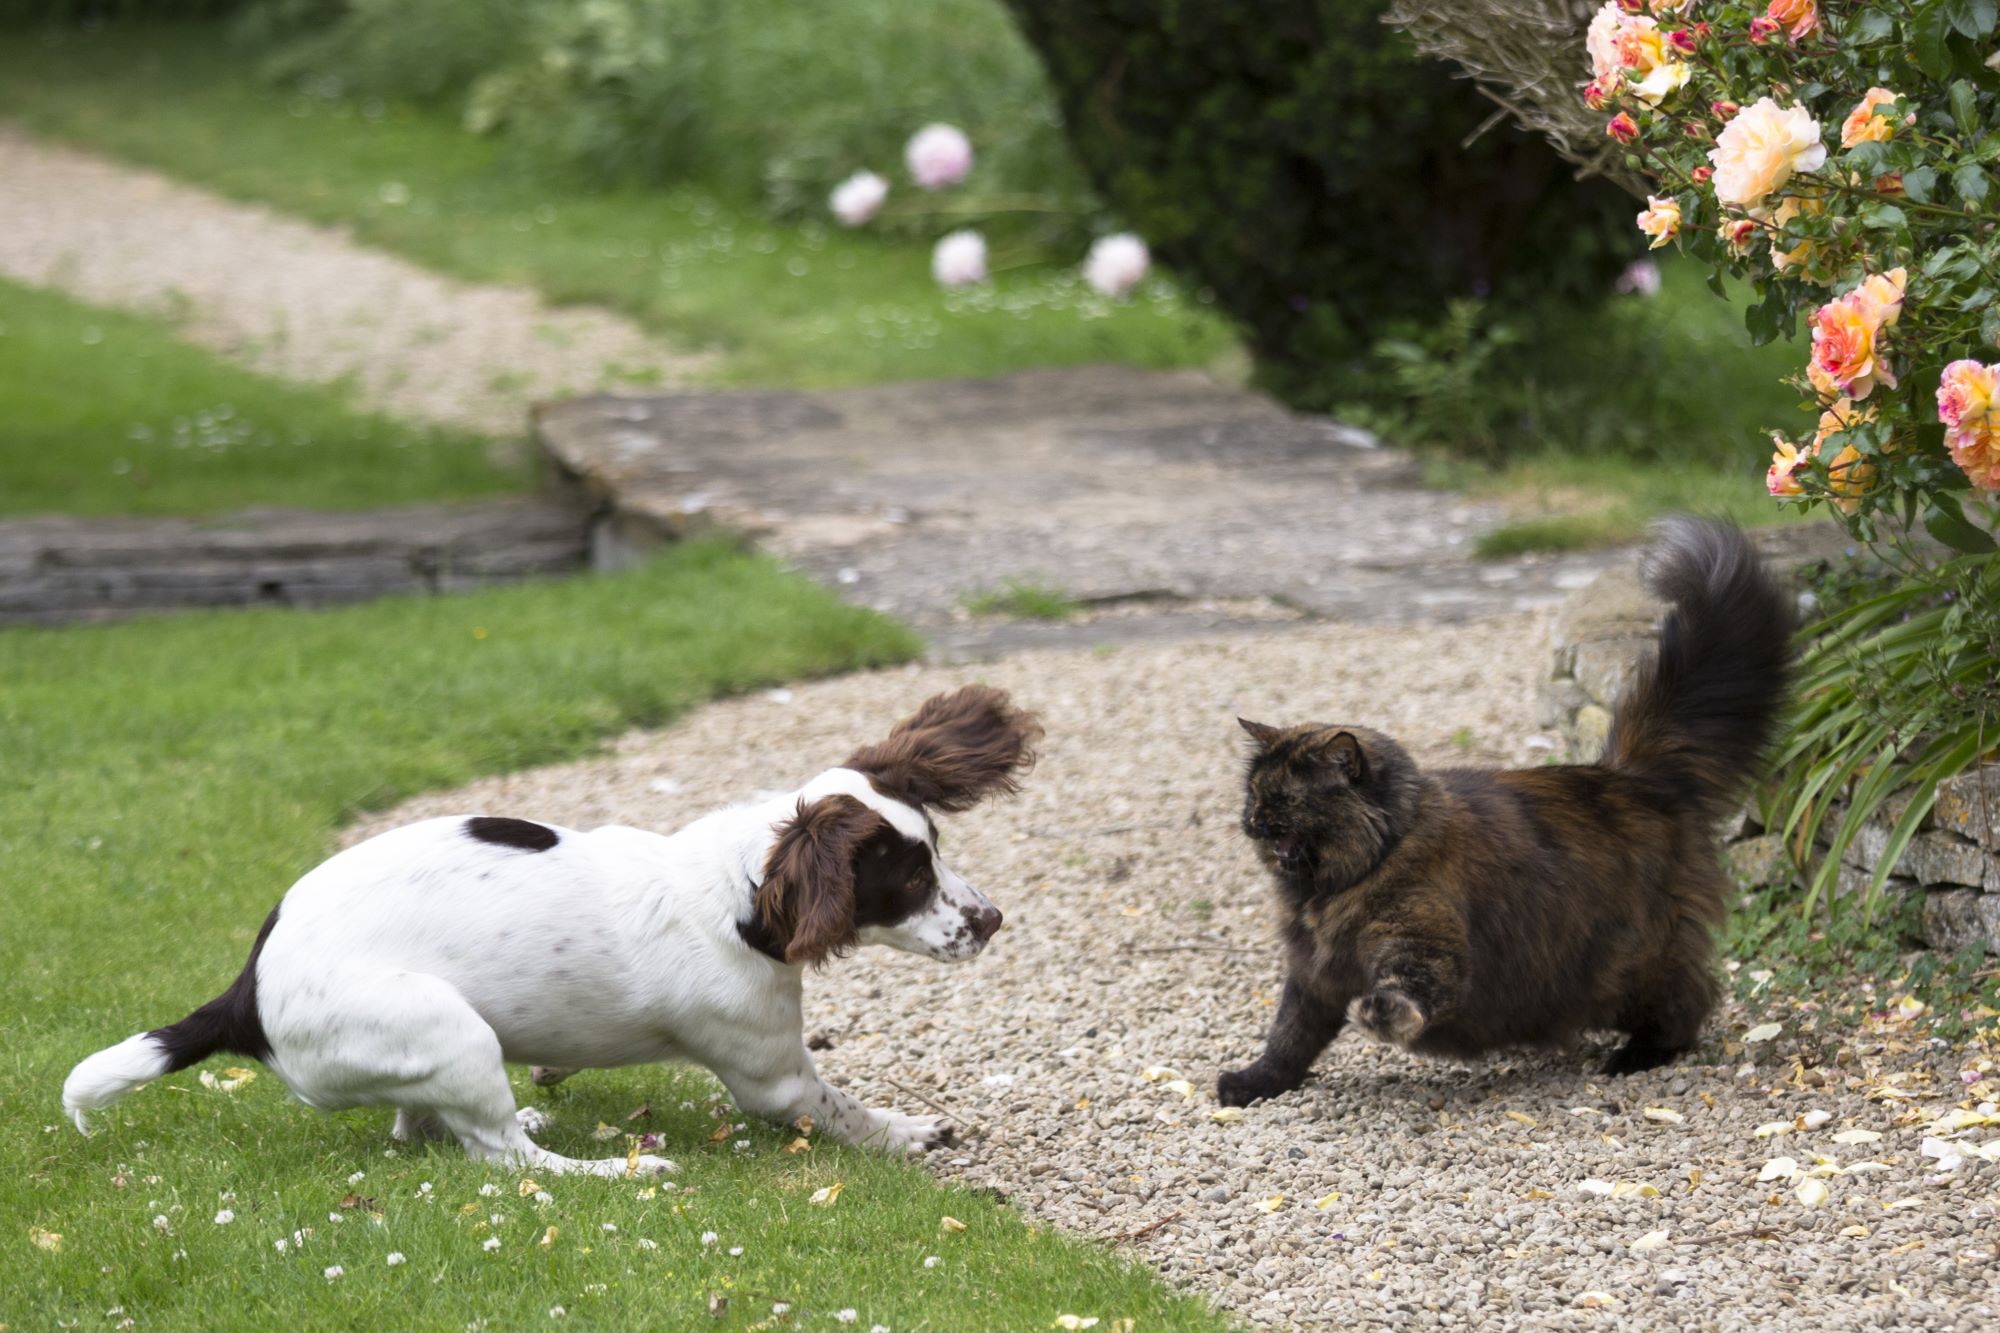 A dog and a cat fighting outside on a garden walkway